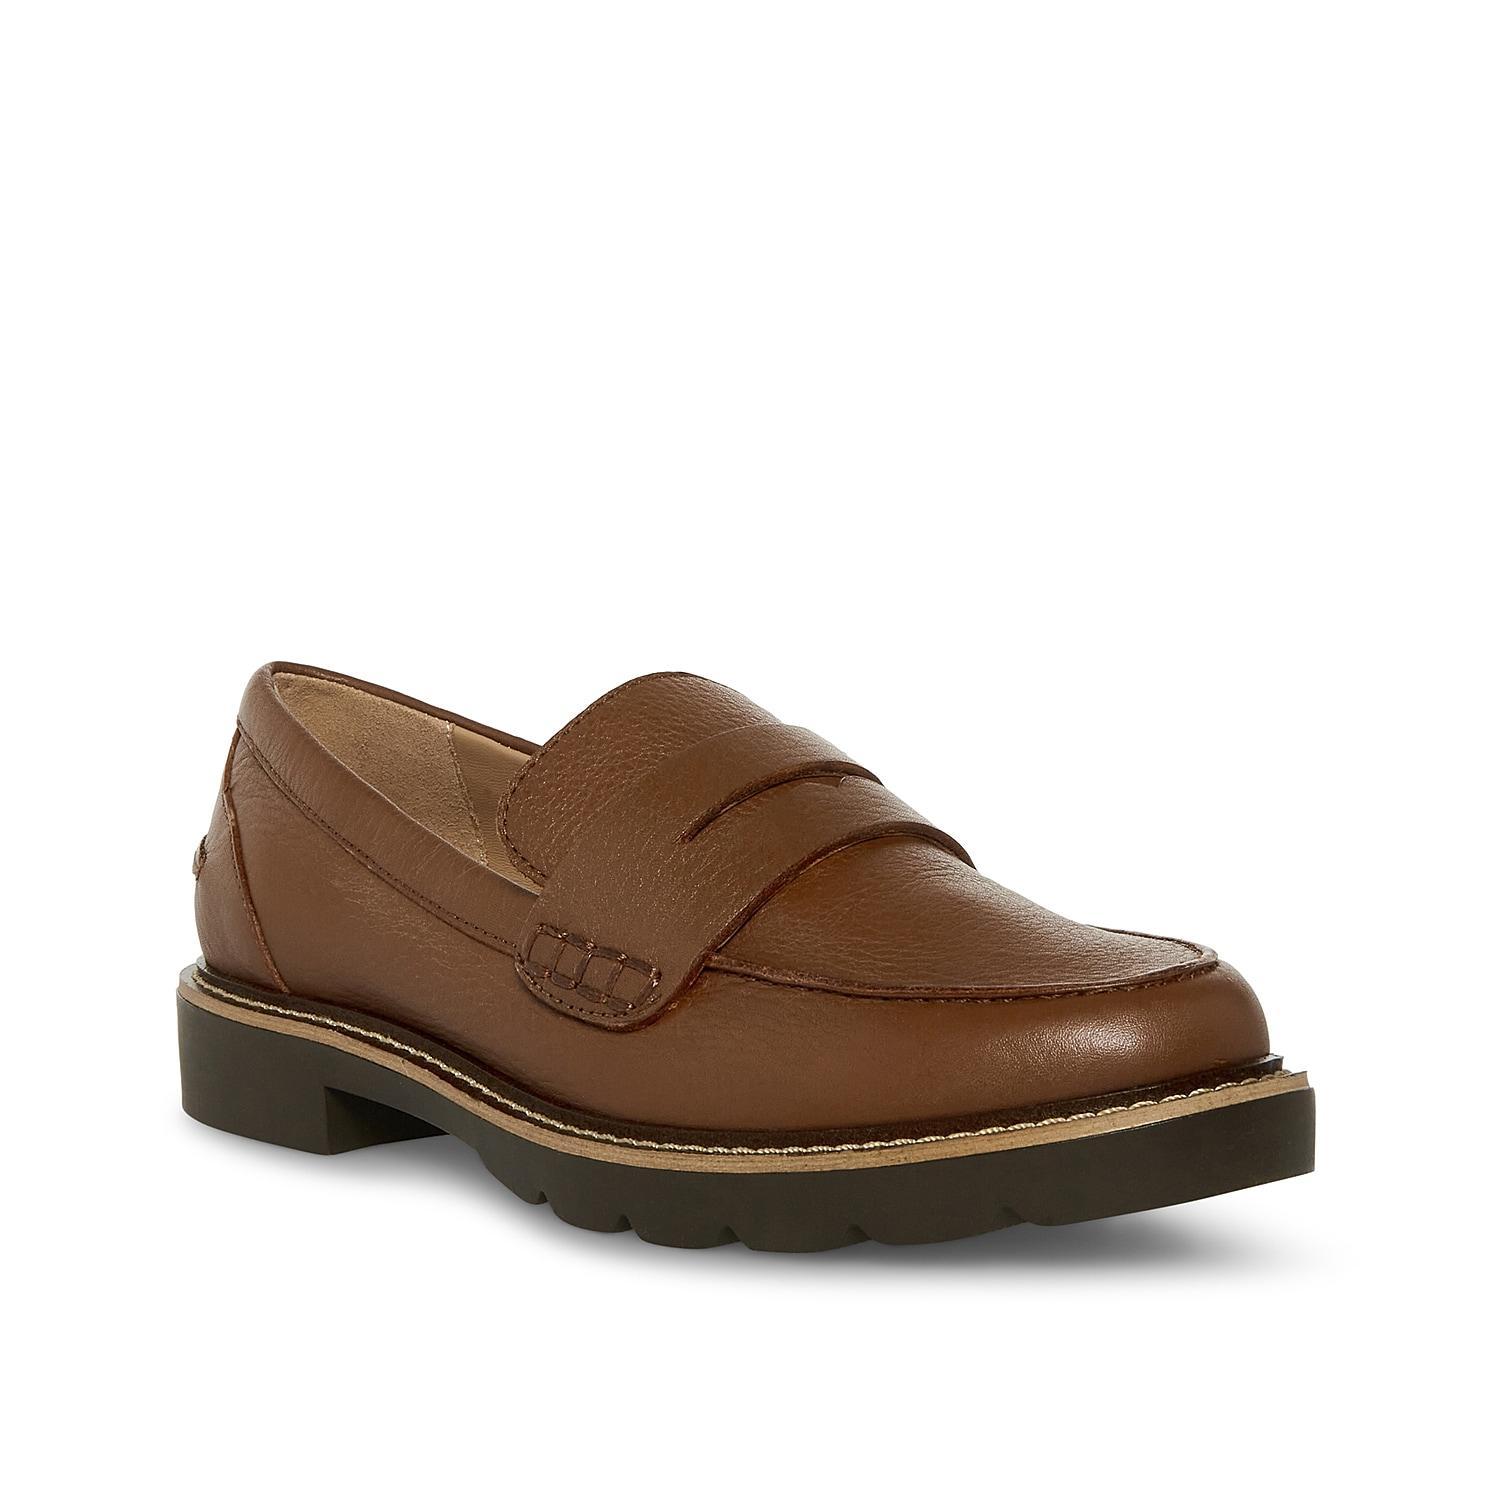 Blondo Waterproof Penny Loafer Product Image